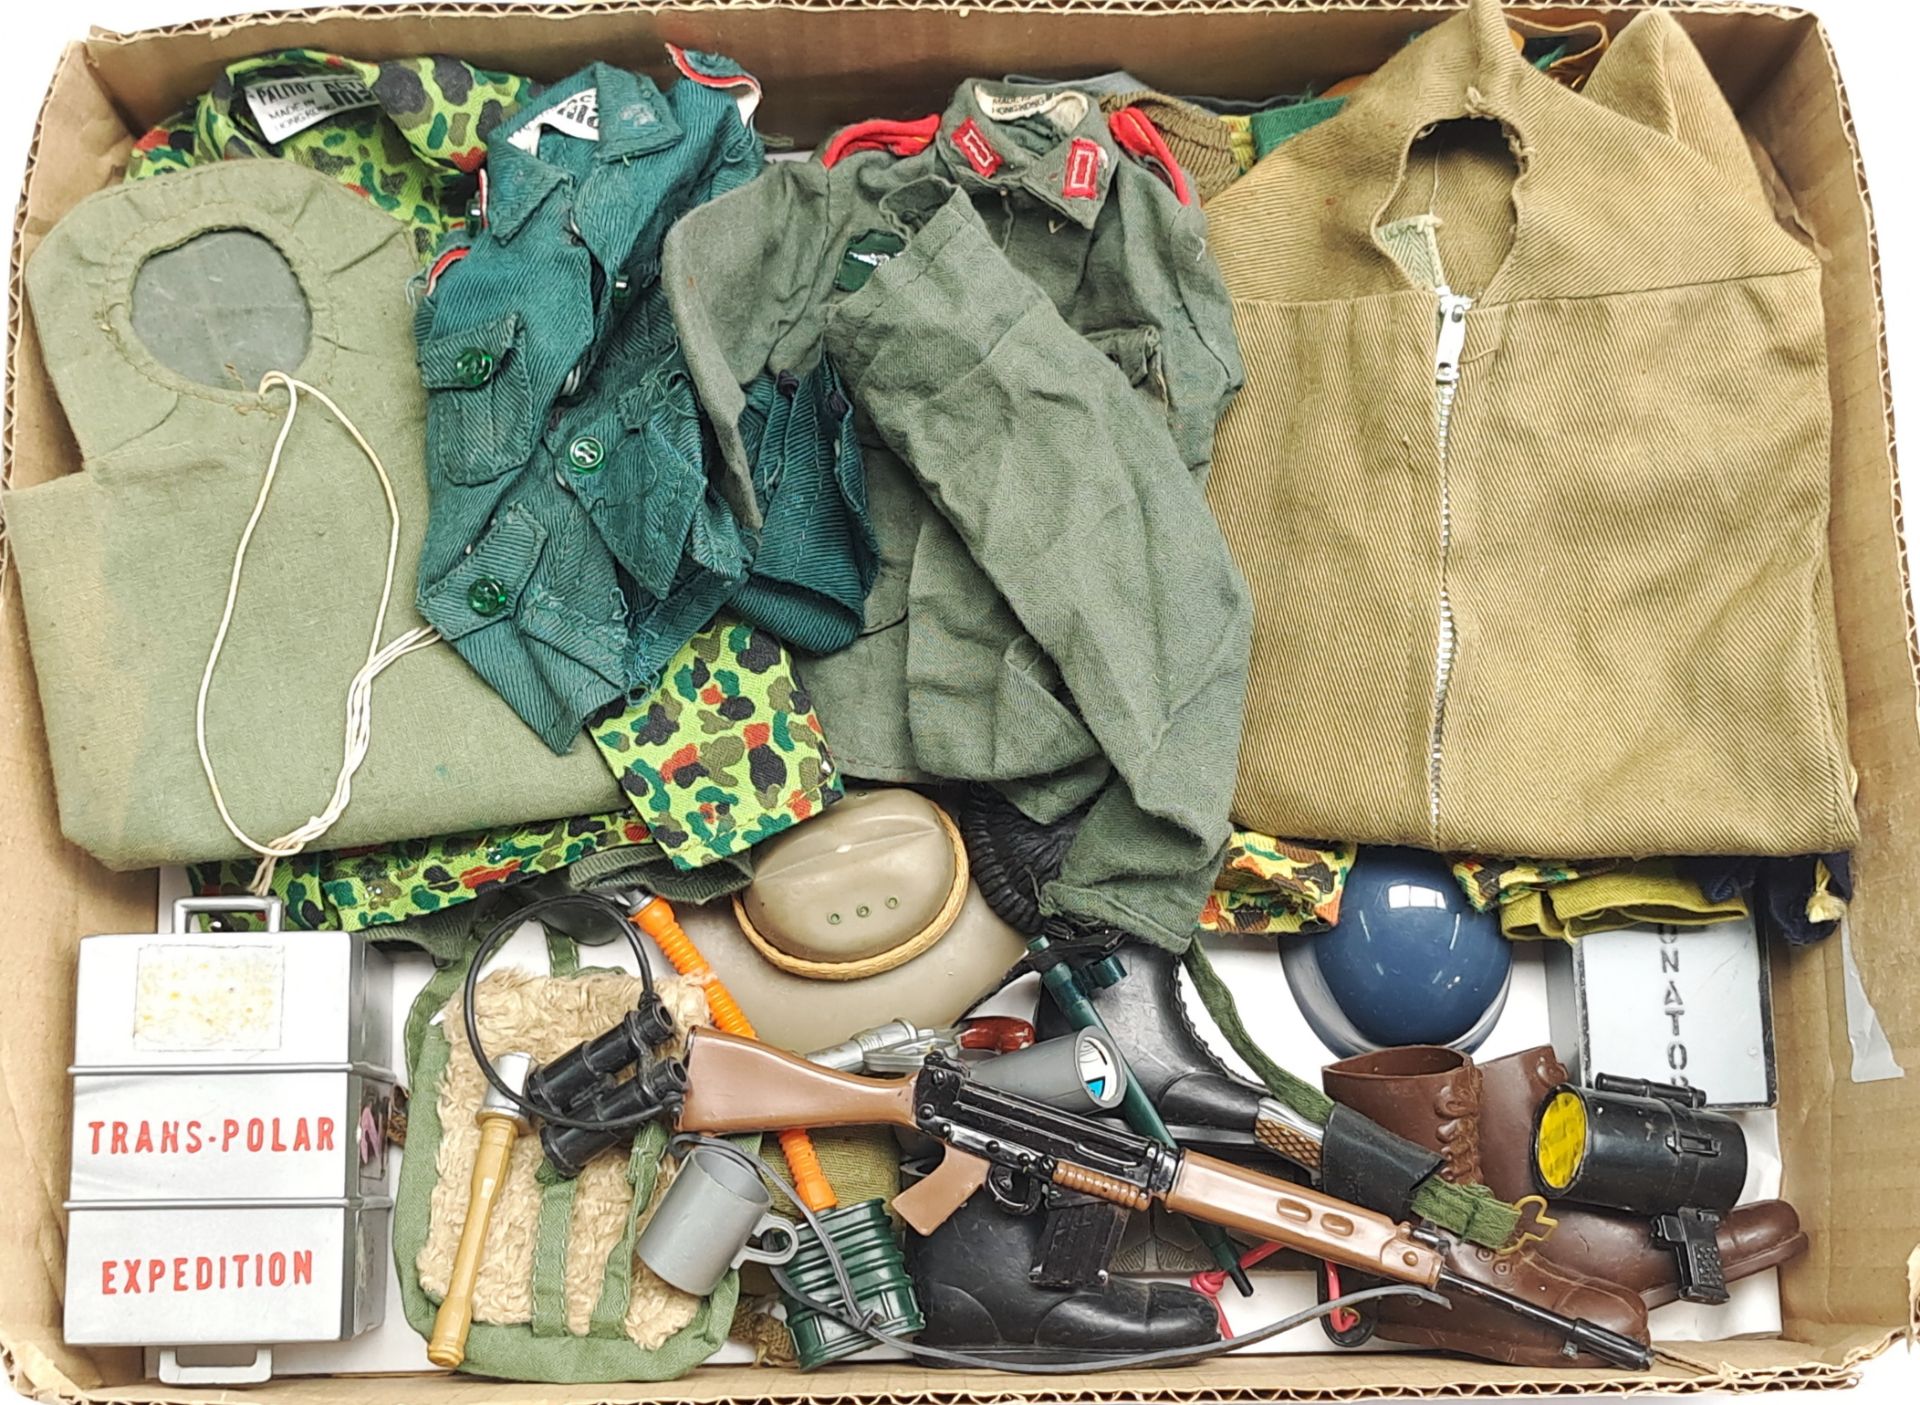 Palitoy Action Man vintage loose clothing/accessories to include guns, various part outfits, helm...